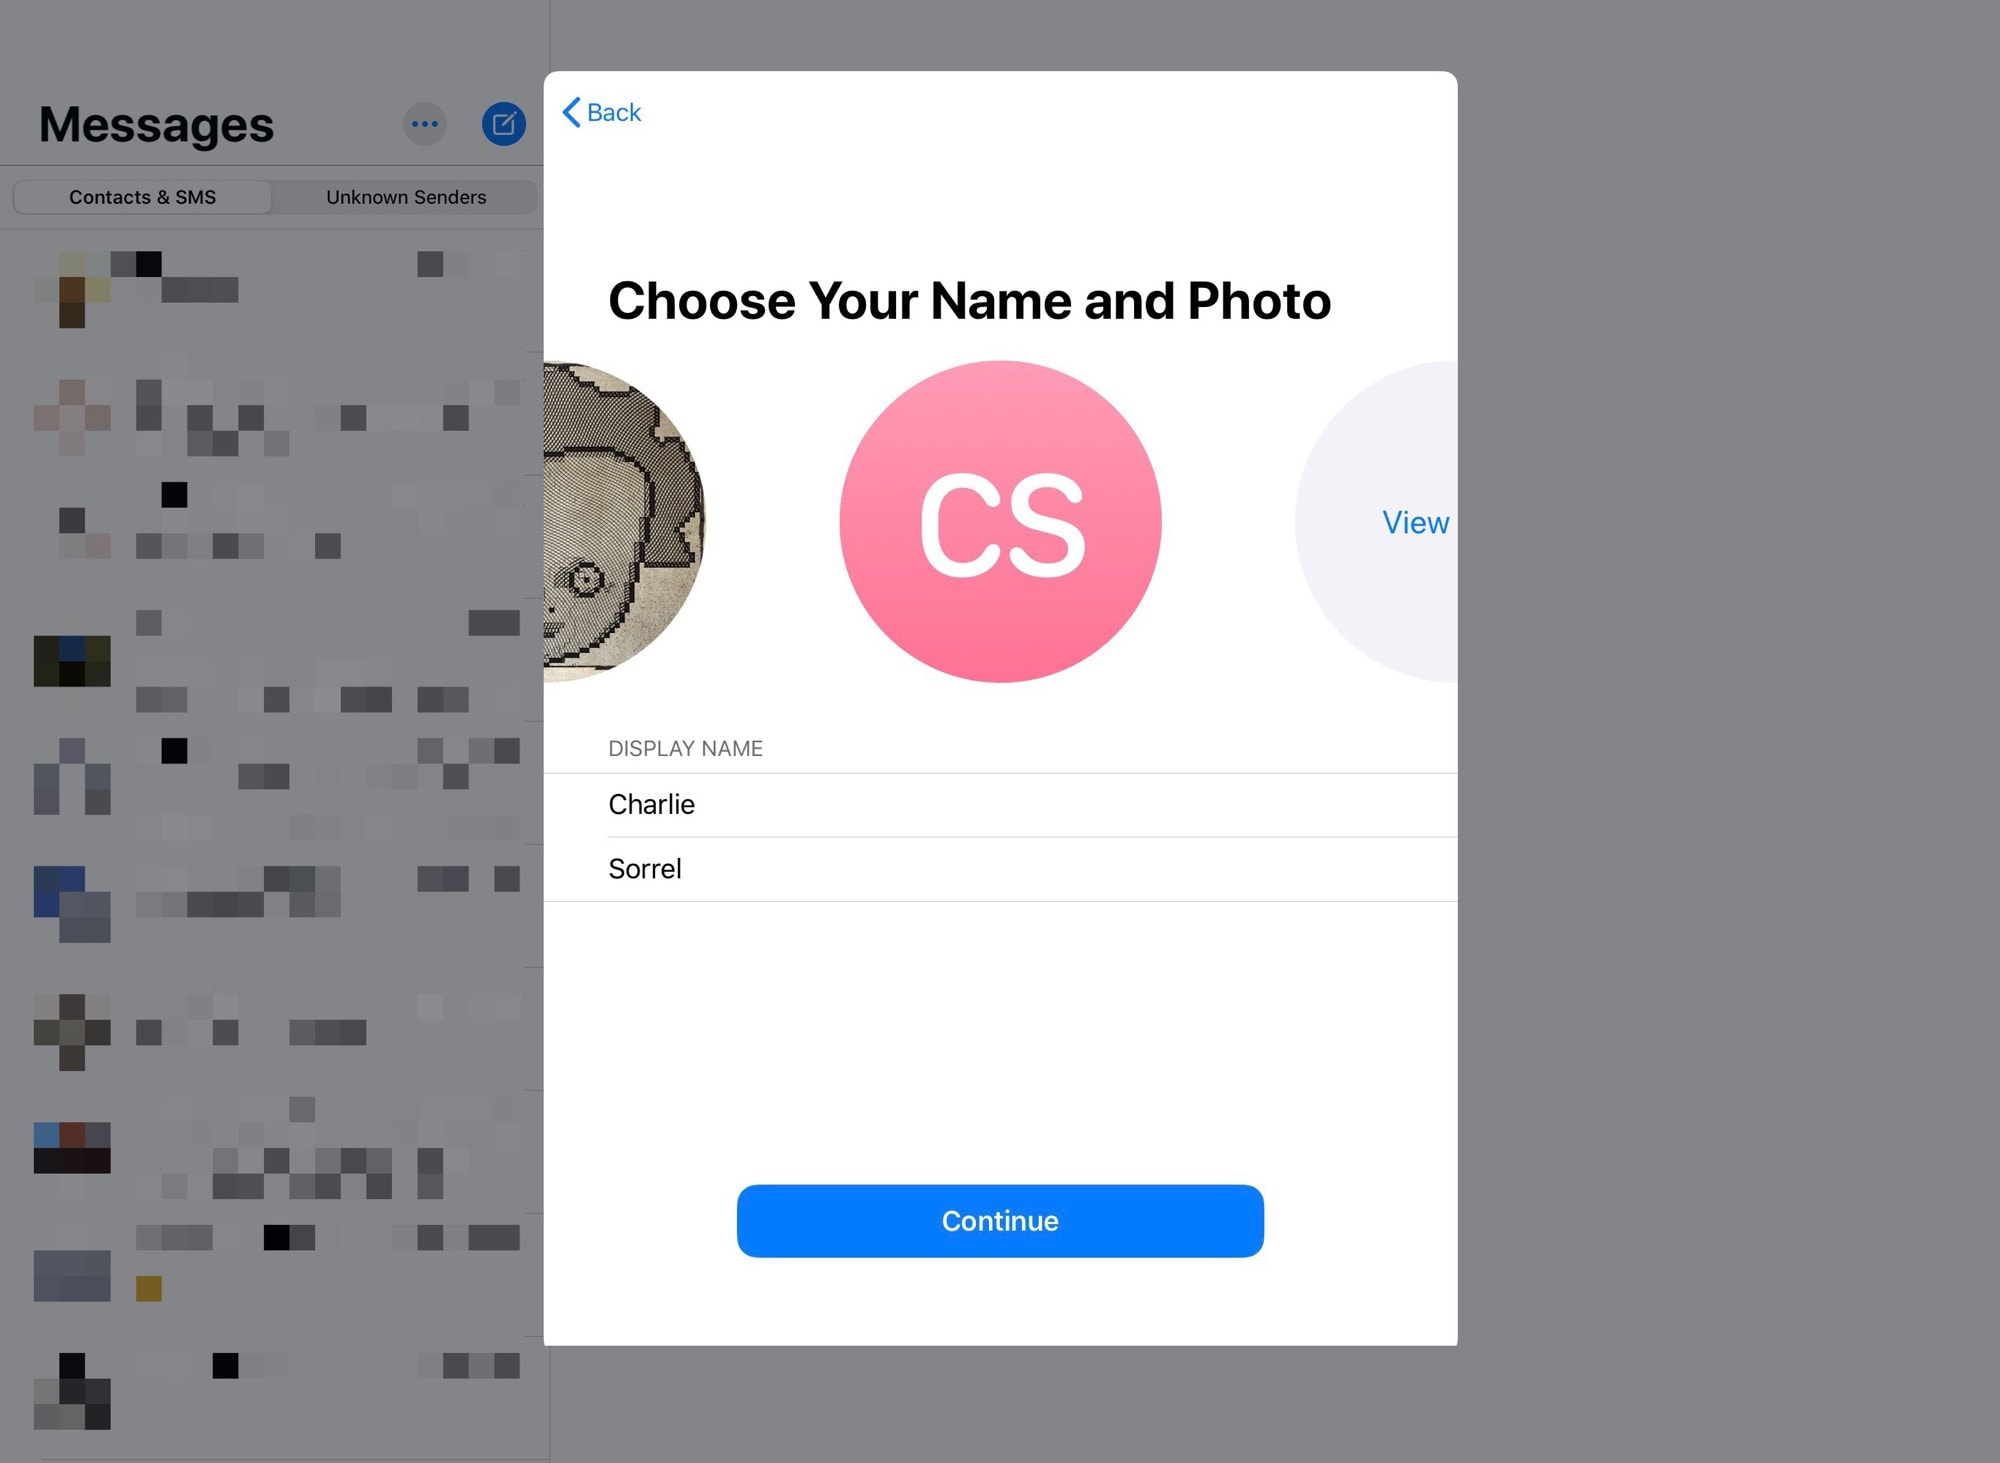 To add a custom photo to iMessages, first choose the image and add your name.